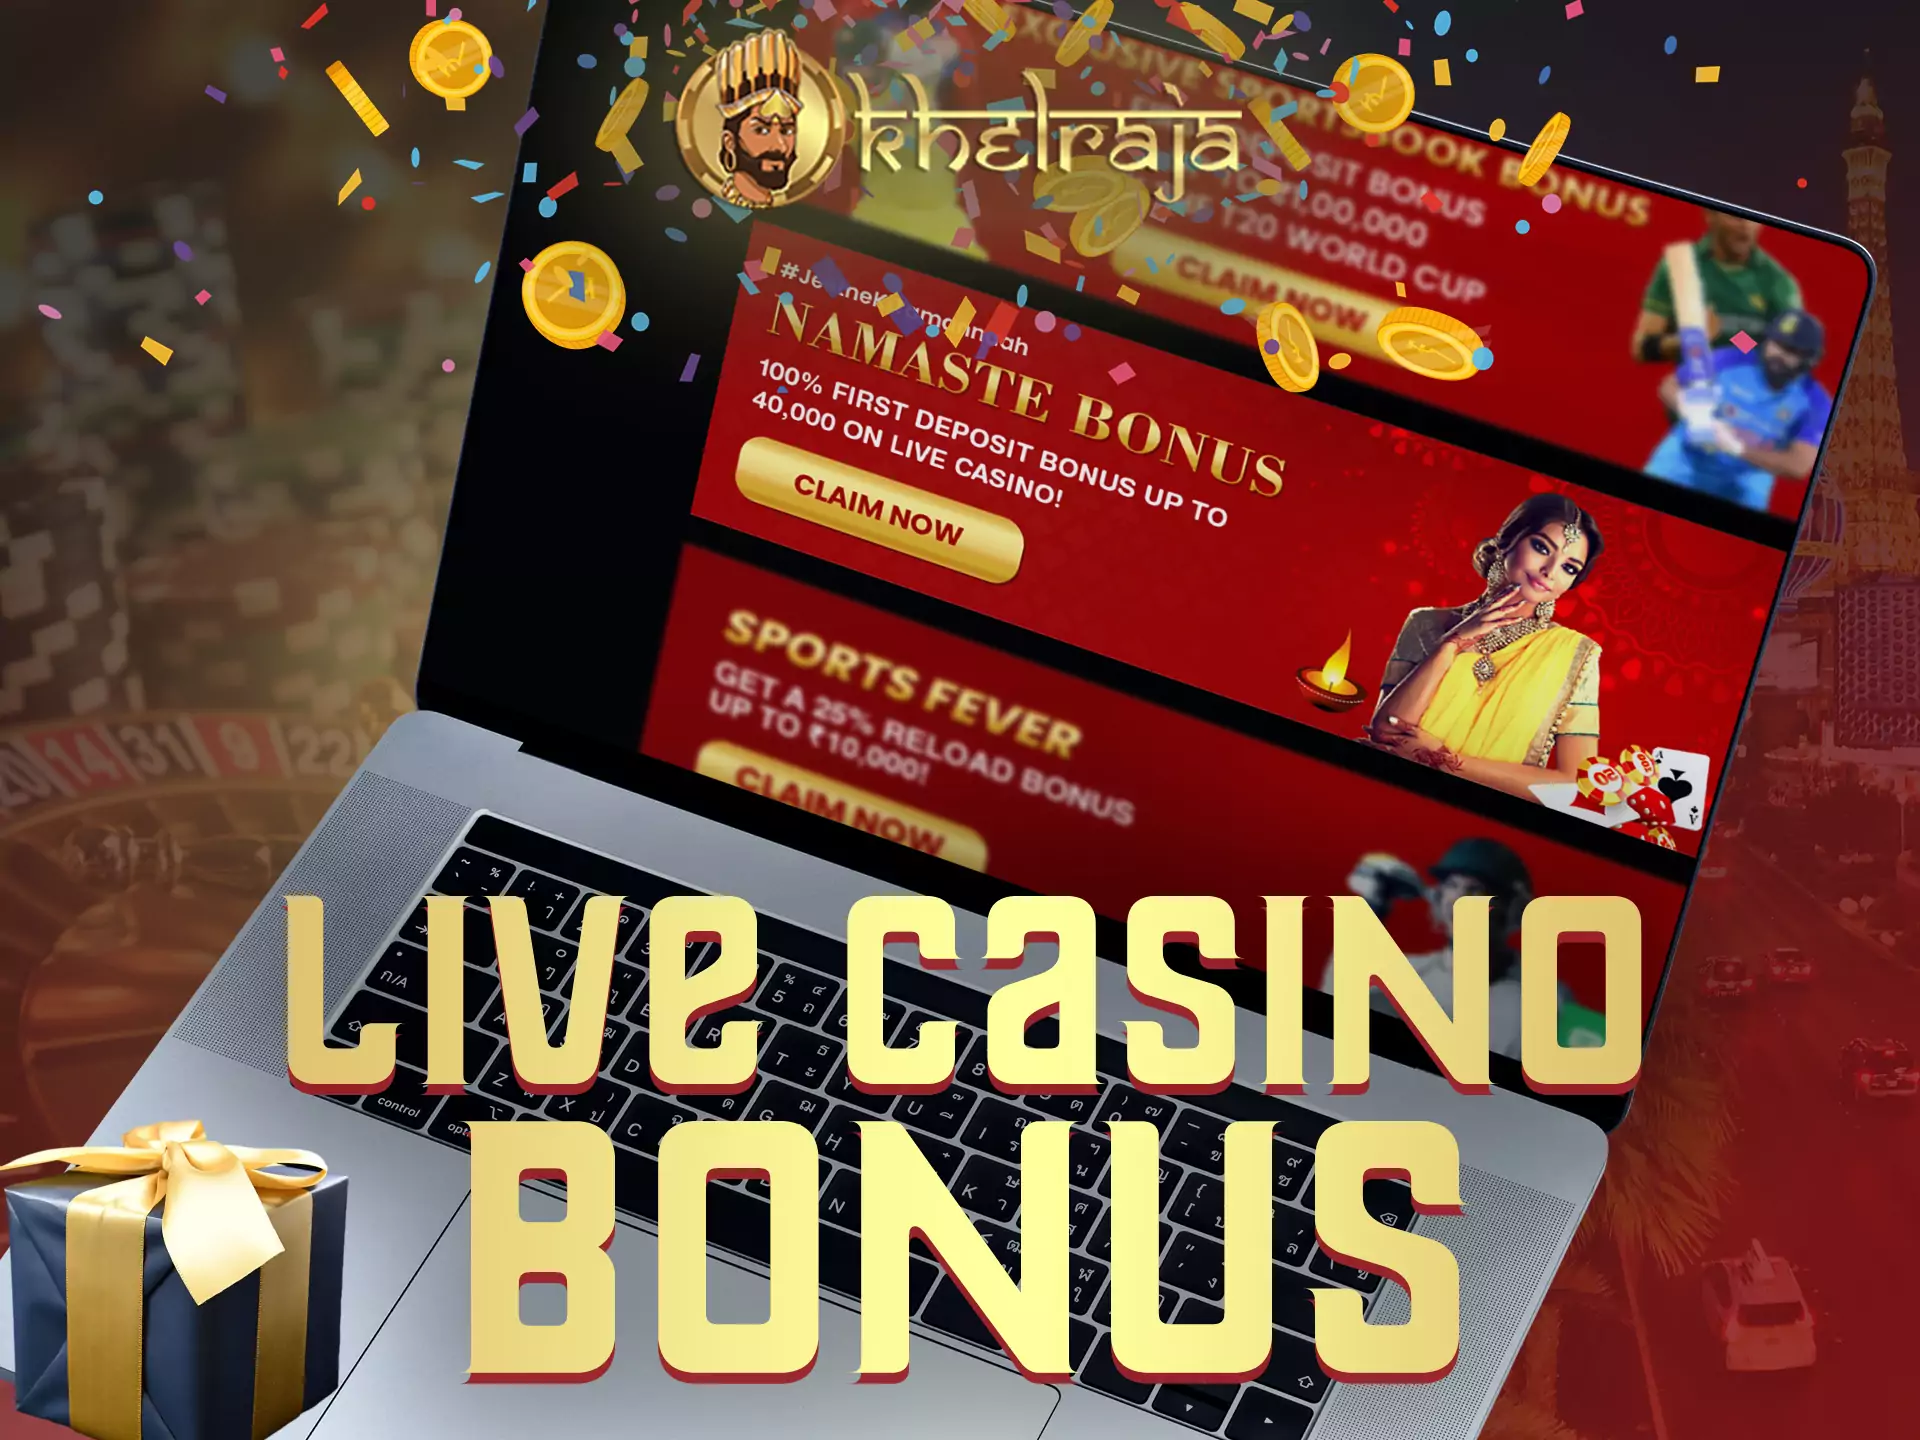 Casino fans can get a special bonus for playing live games on the Khelraja site.